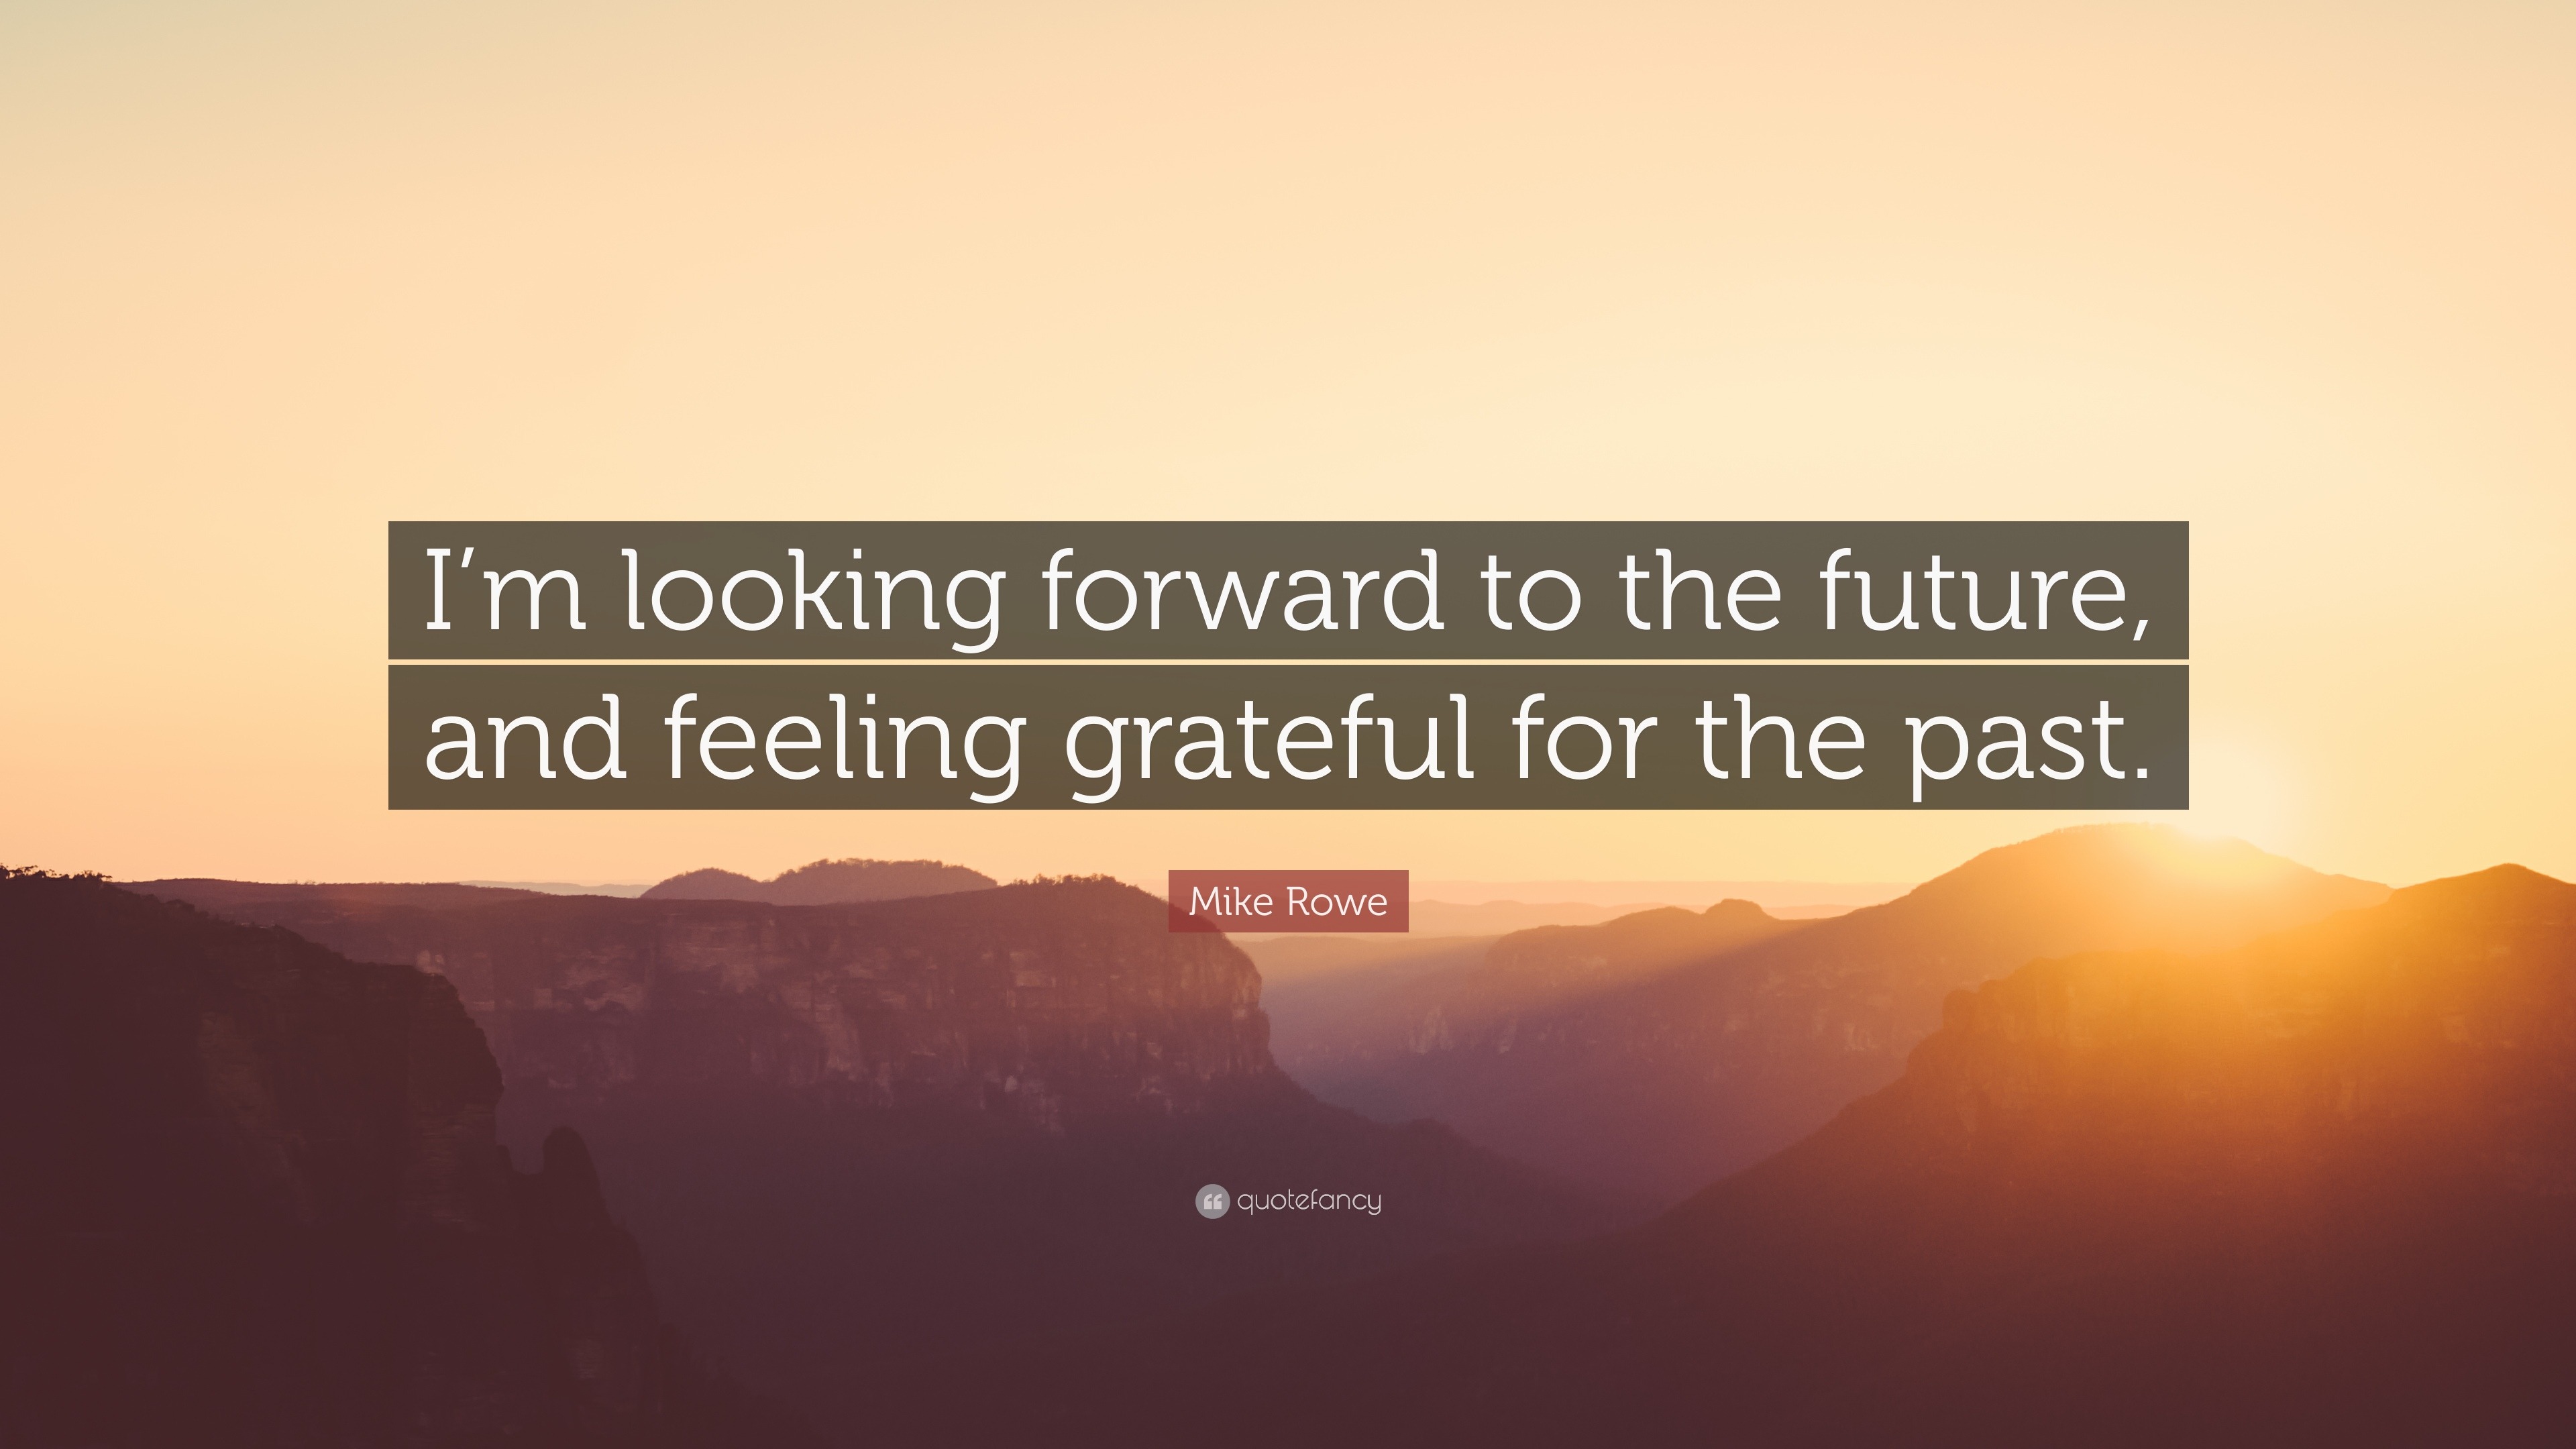 Mike Rowe Quote: “I’m looking forward to the future, and feeling